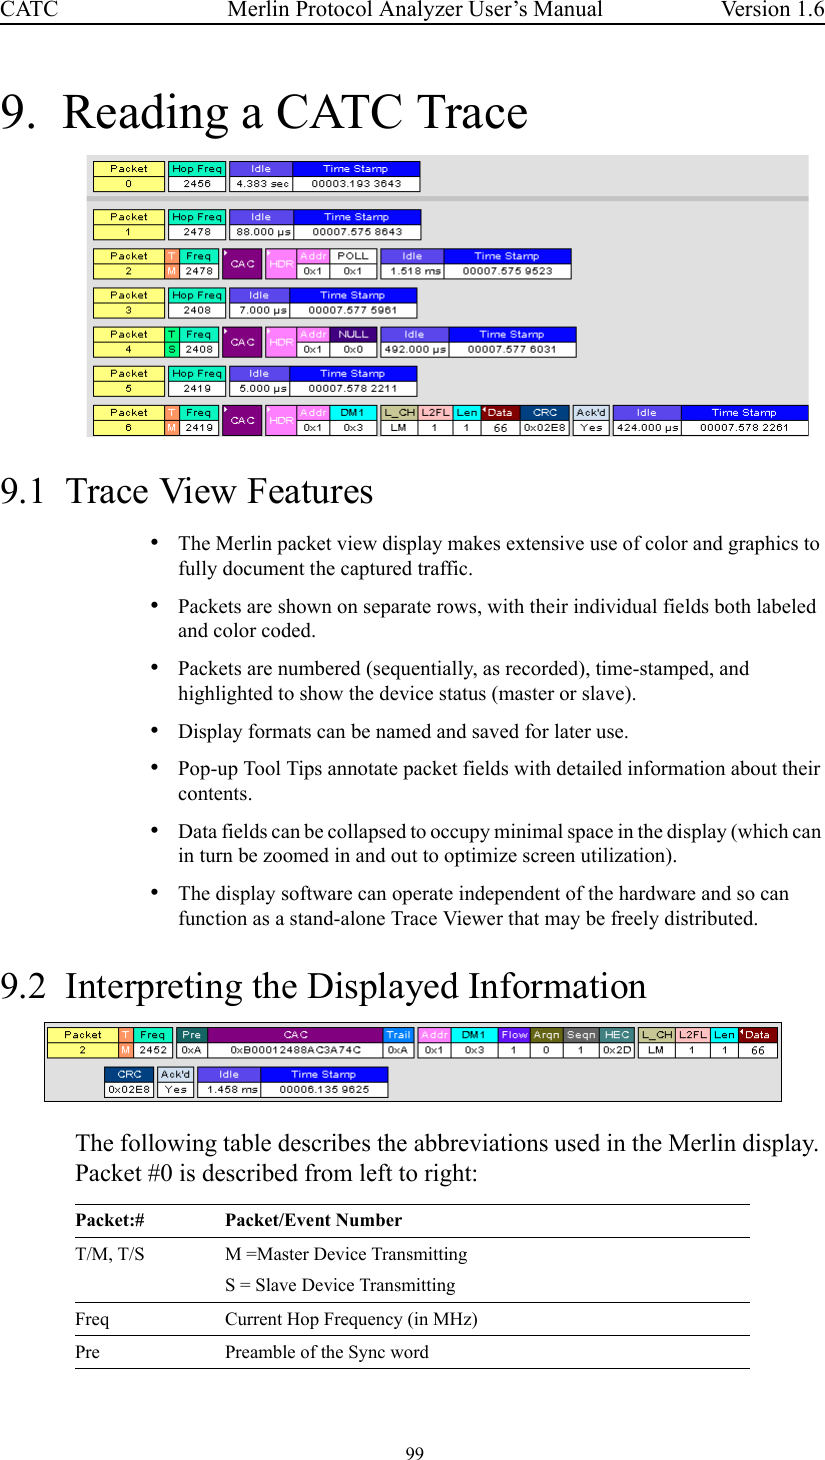  99 Merlin Protocol Analyzer User’s ManualCATC Version 1.69.  Reading a CATC Trace9.1  Trace View Features•The Merlin packet view display makes extensive use of color and graphics to fully document the captured traffic.•Packets are shown on separate rows, with their individual fields both labeled and color coded. •Packets are numbered (sequentially, as recorded), time-stamped, and highlighted to show the device status (master or slave).•Display formats can be named and saved for later use. •Pop-up Tool Tips annotate packet fields with detailed information about their contents.•Data fields can be collapsed to occupy minimal space in the display (which can in turn be zoomed in and out to optimize screen utilization). •The display software can operate independent of the hardware and so can function as a stand-alone Trace Viewer that may be freely distributed.9.2  Interpreting the Displayed InformationThe following table describes the abbreviations used in the Merlin display. Packet #0 is described from left to right:Packet:# Packet/Event NumberT/M, T/S M =Master Device TransmittingS = Slave Device TransmittingFreq Current Hop Frequency (in MHz)Pre Preamble of the Sync word